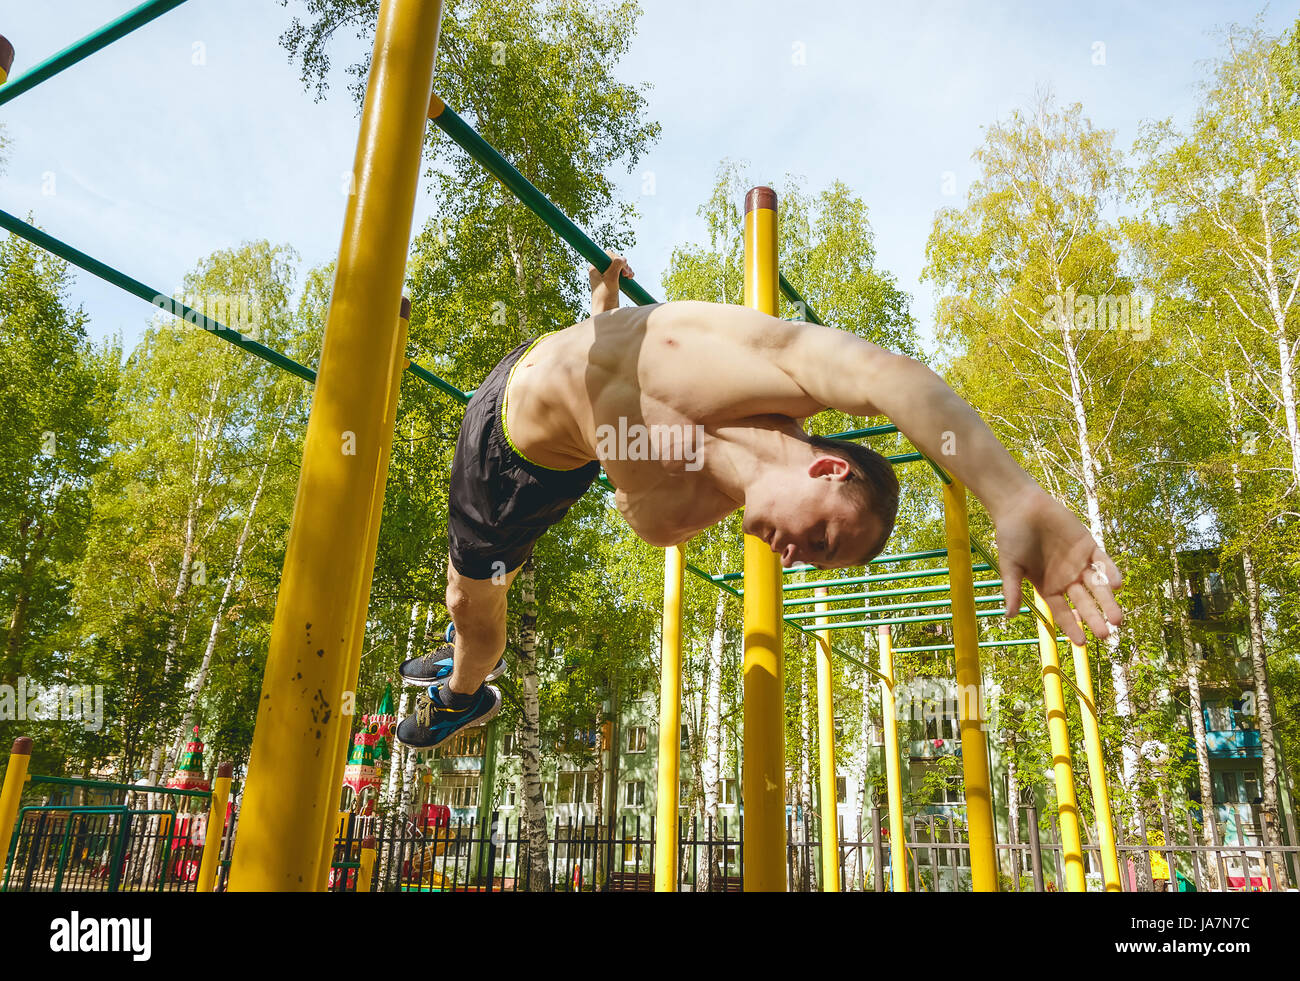 Fitness man at the bar. Exercising outdoors in the Park. Street workout Stock Photo